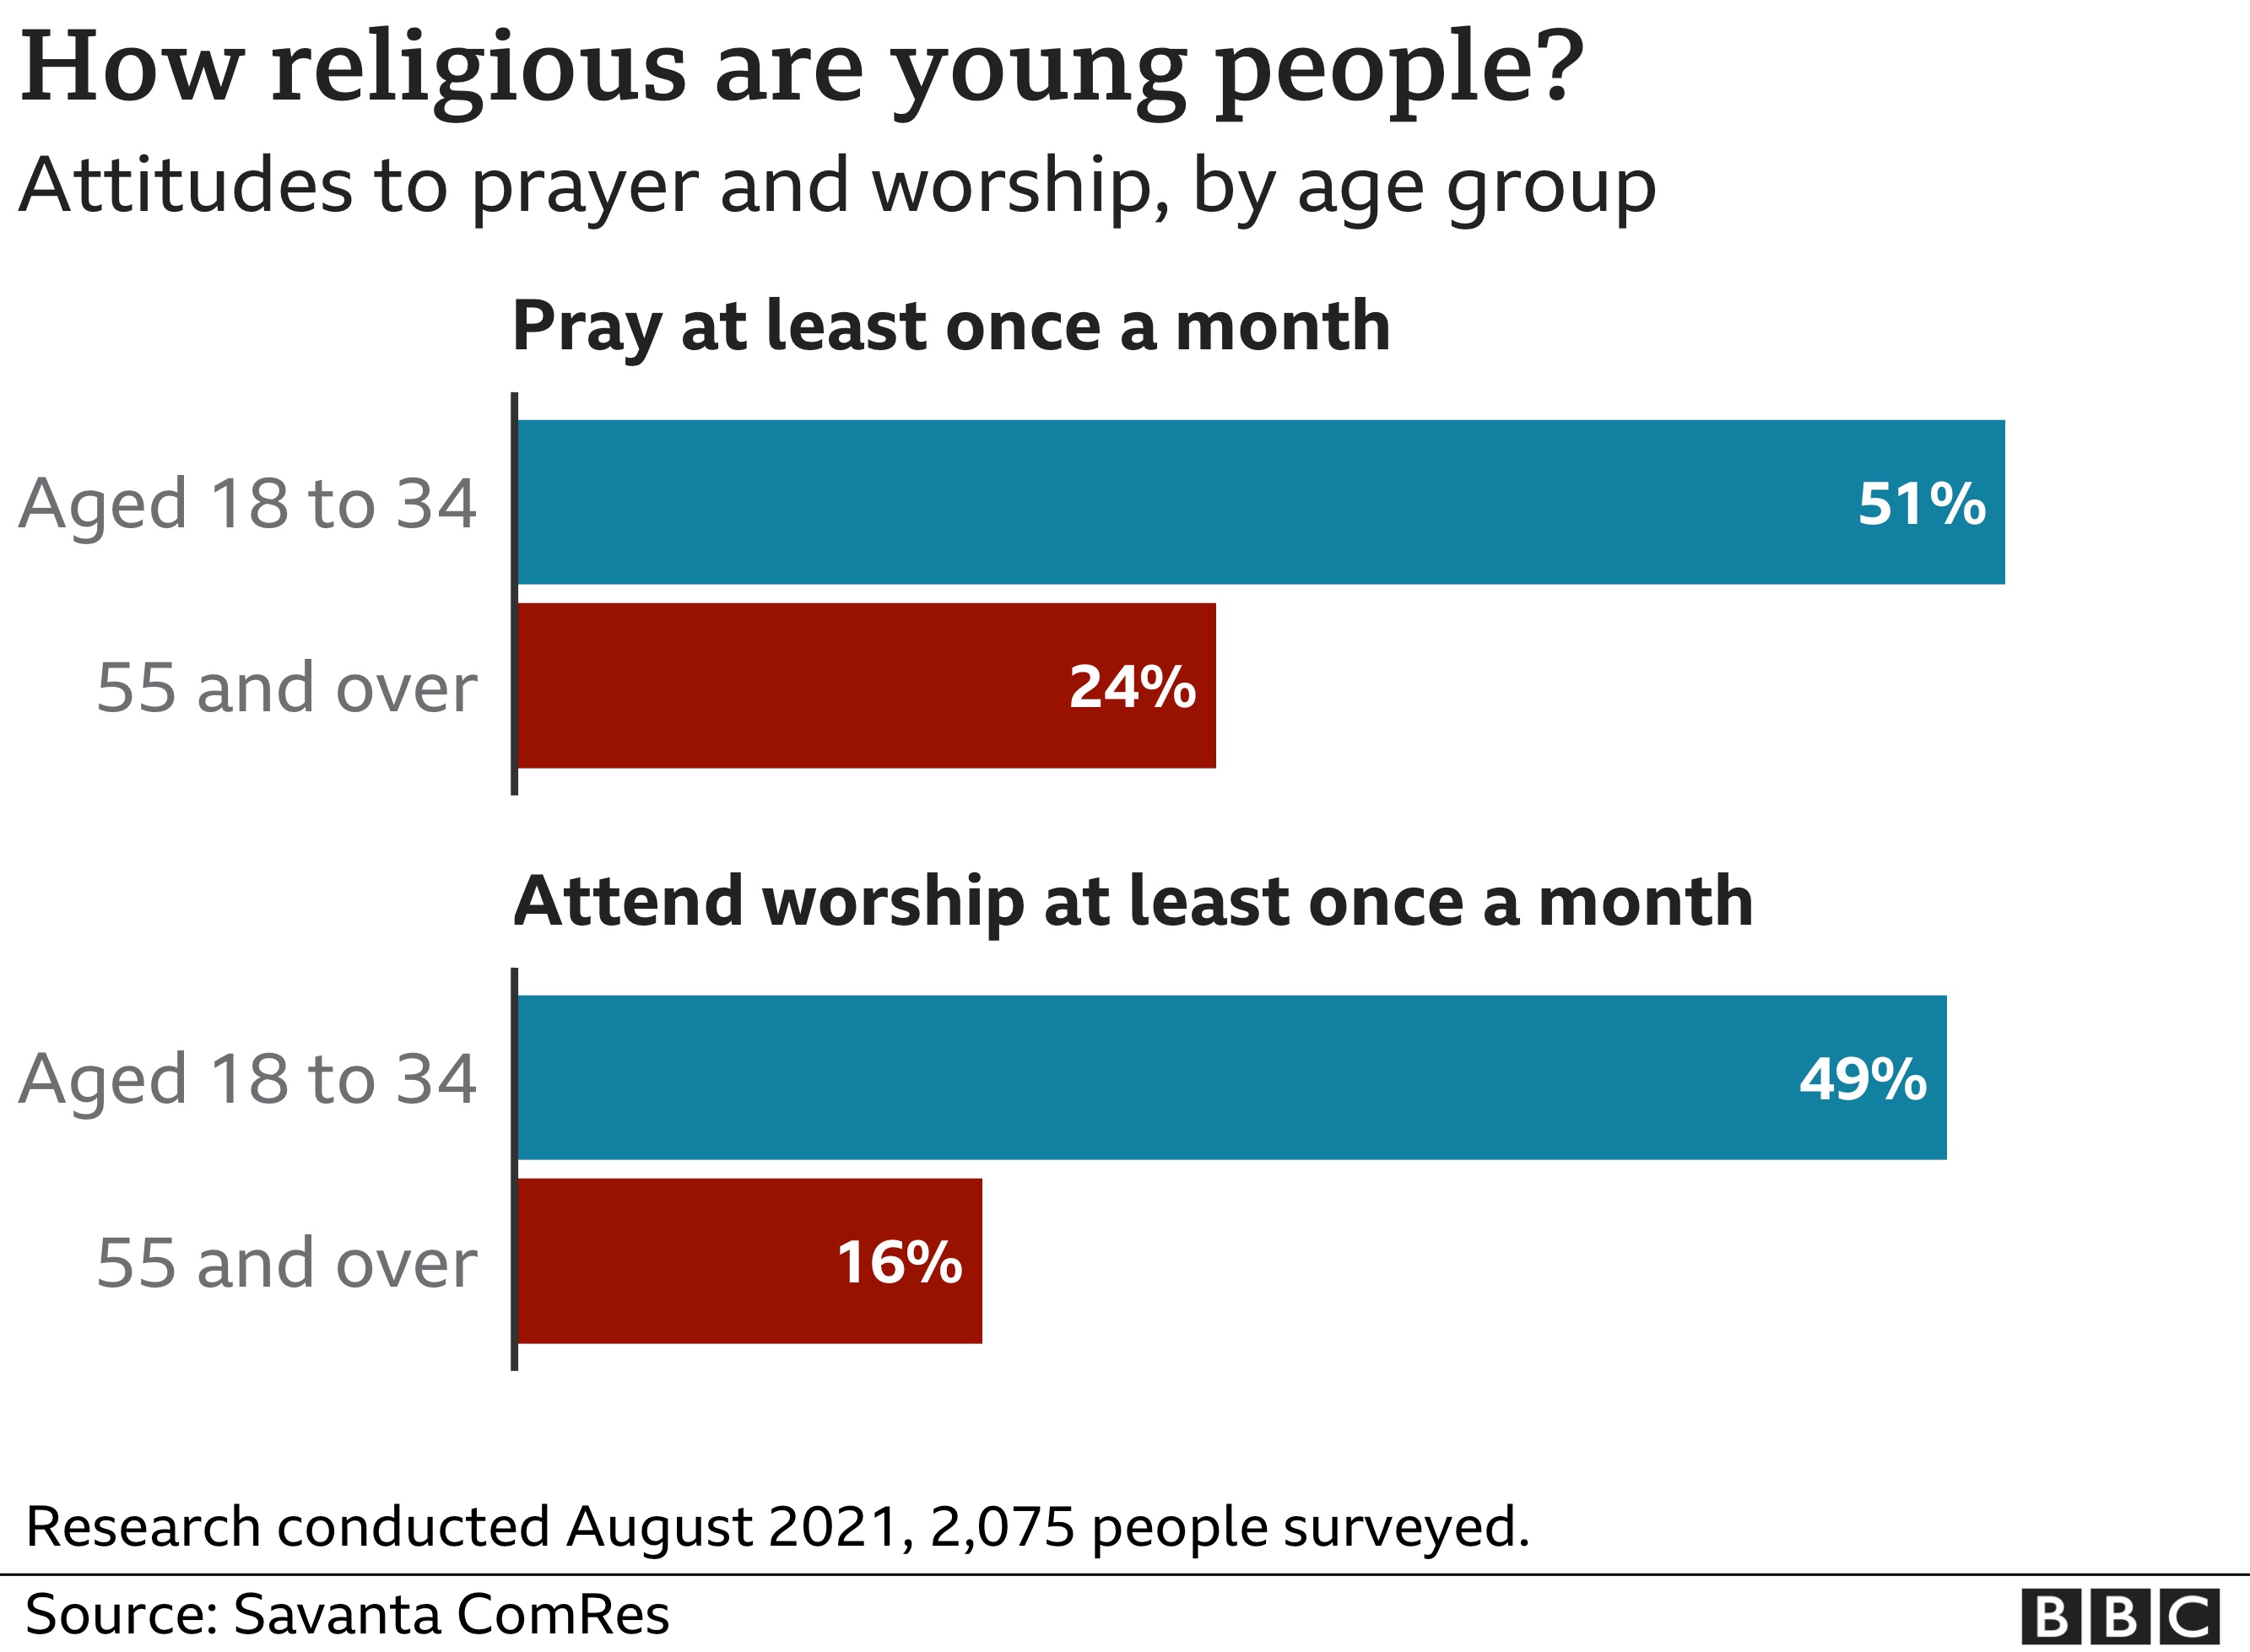 Graphic showing how religious are young people in the UK.